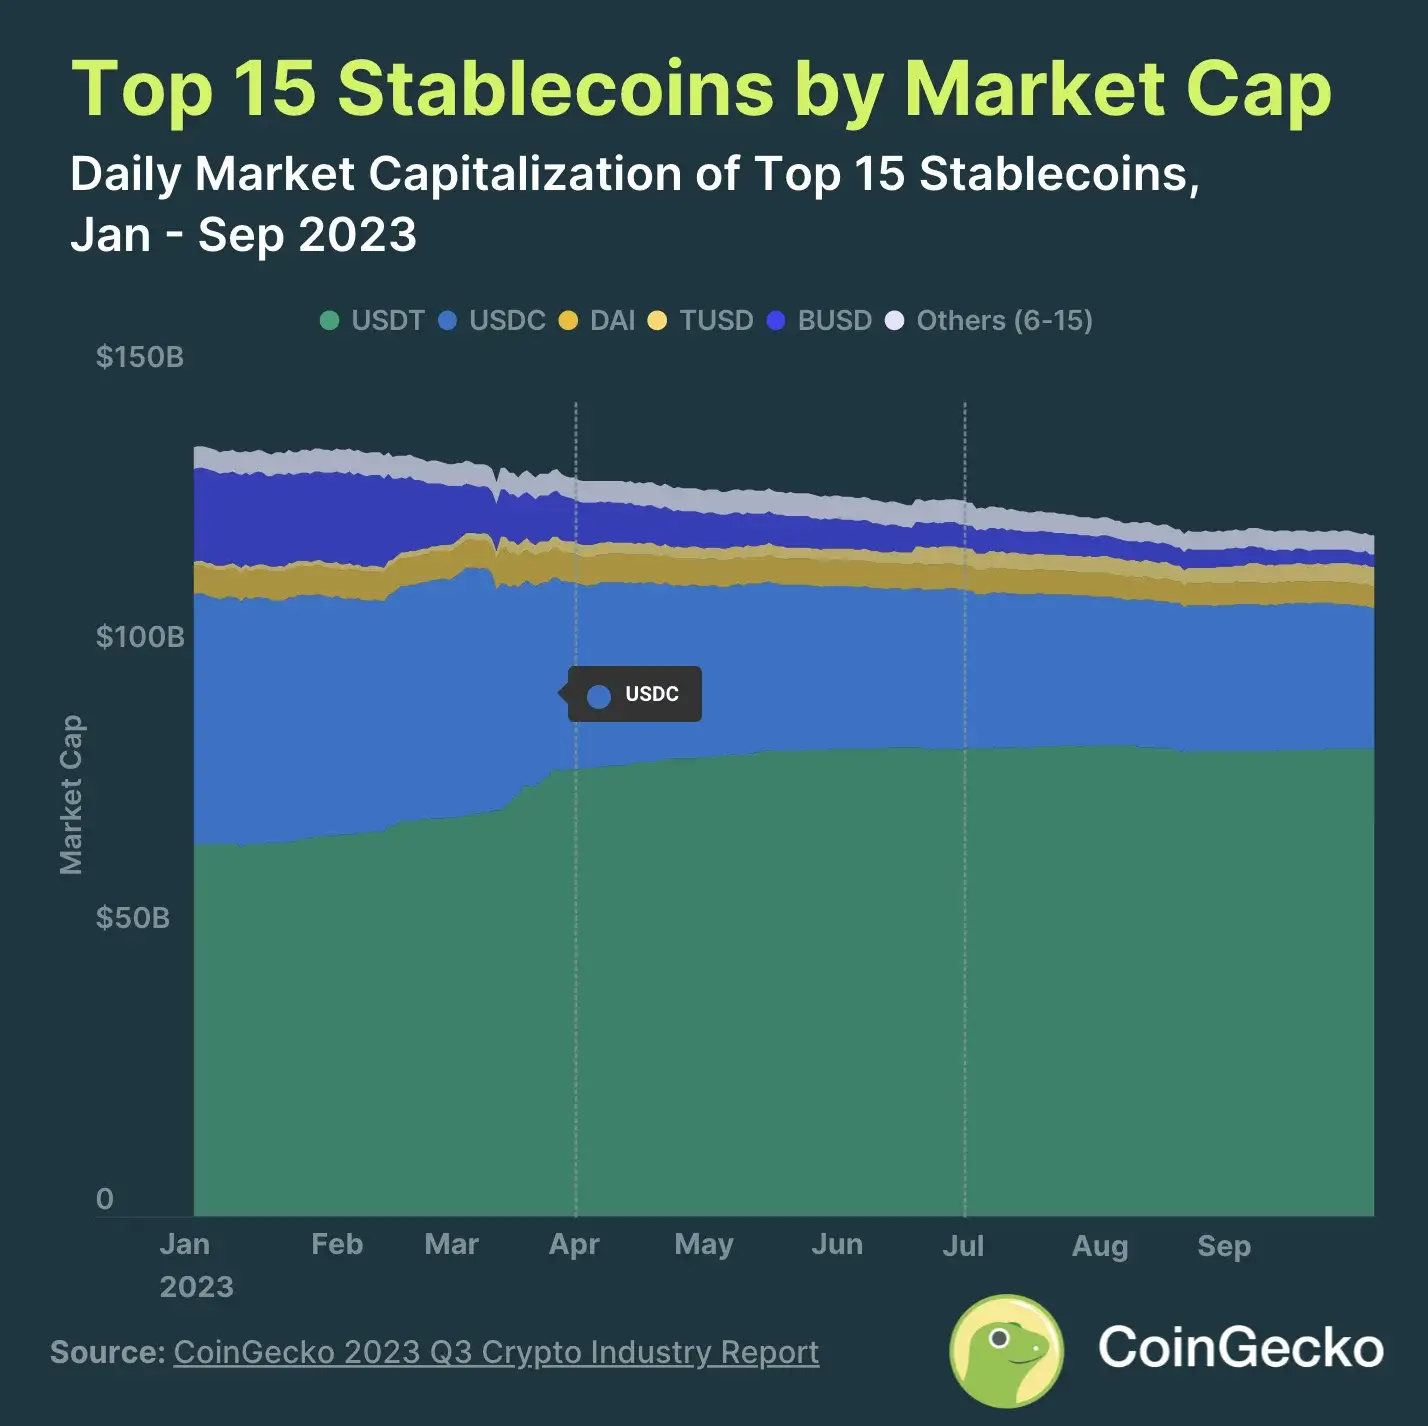 4. Stablecoins volume fell by 3.8%